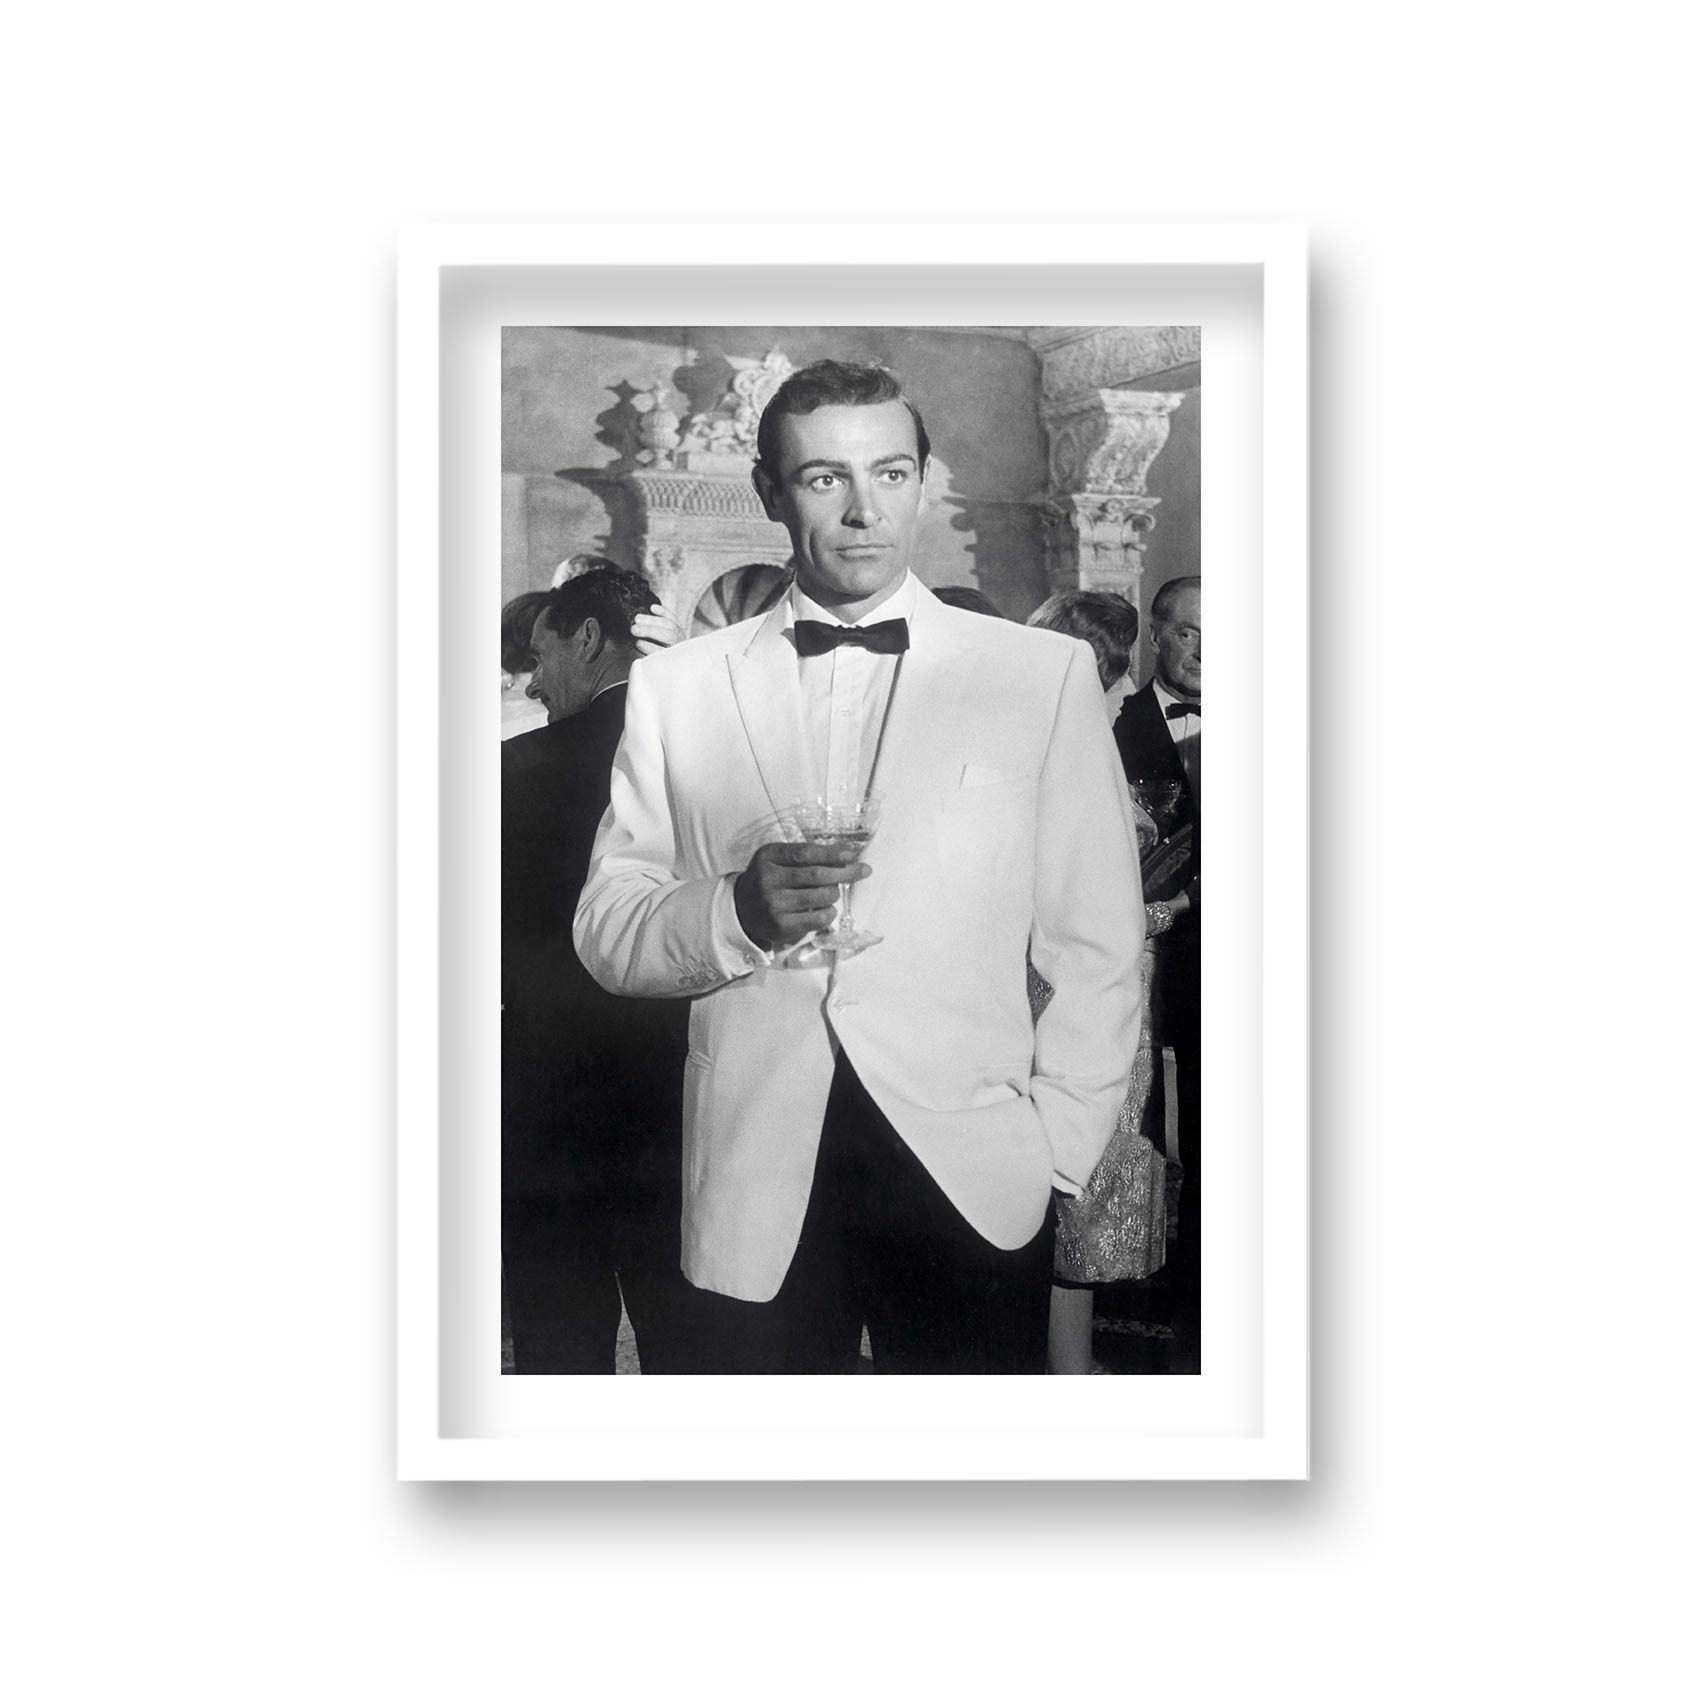 Sean Connery as James Bond in Iconic White Dinner Jacket Goldfinger